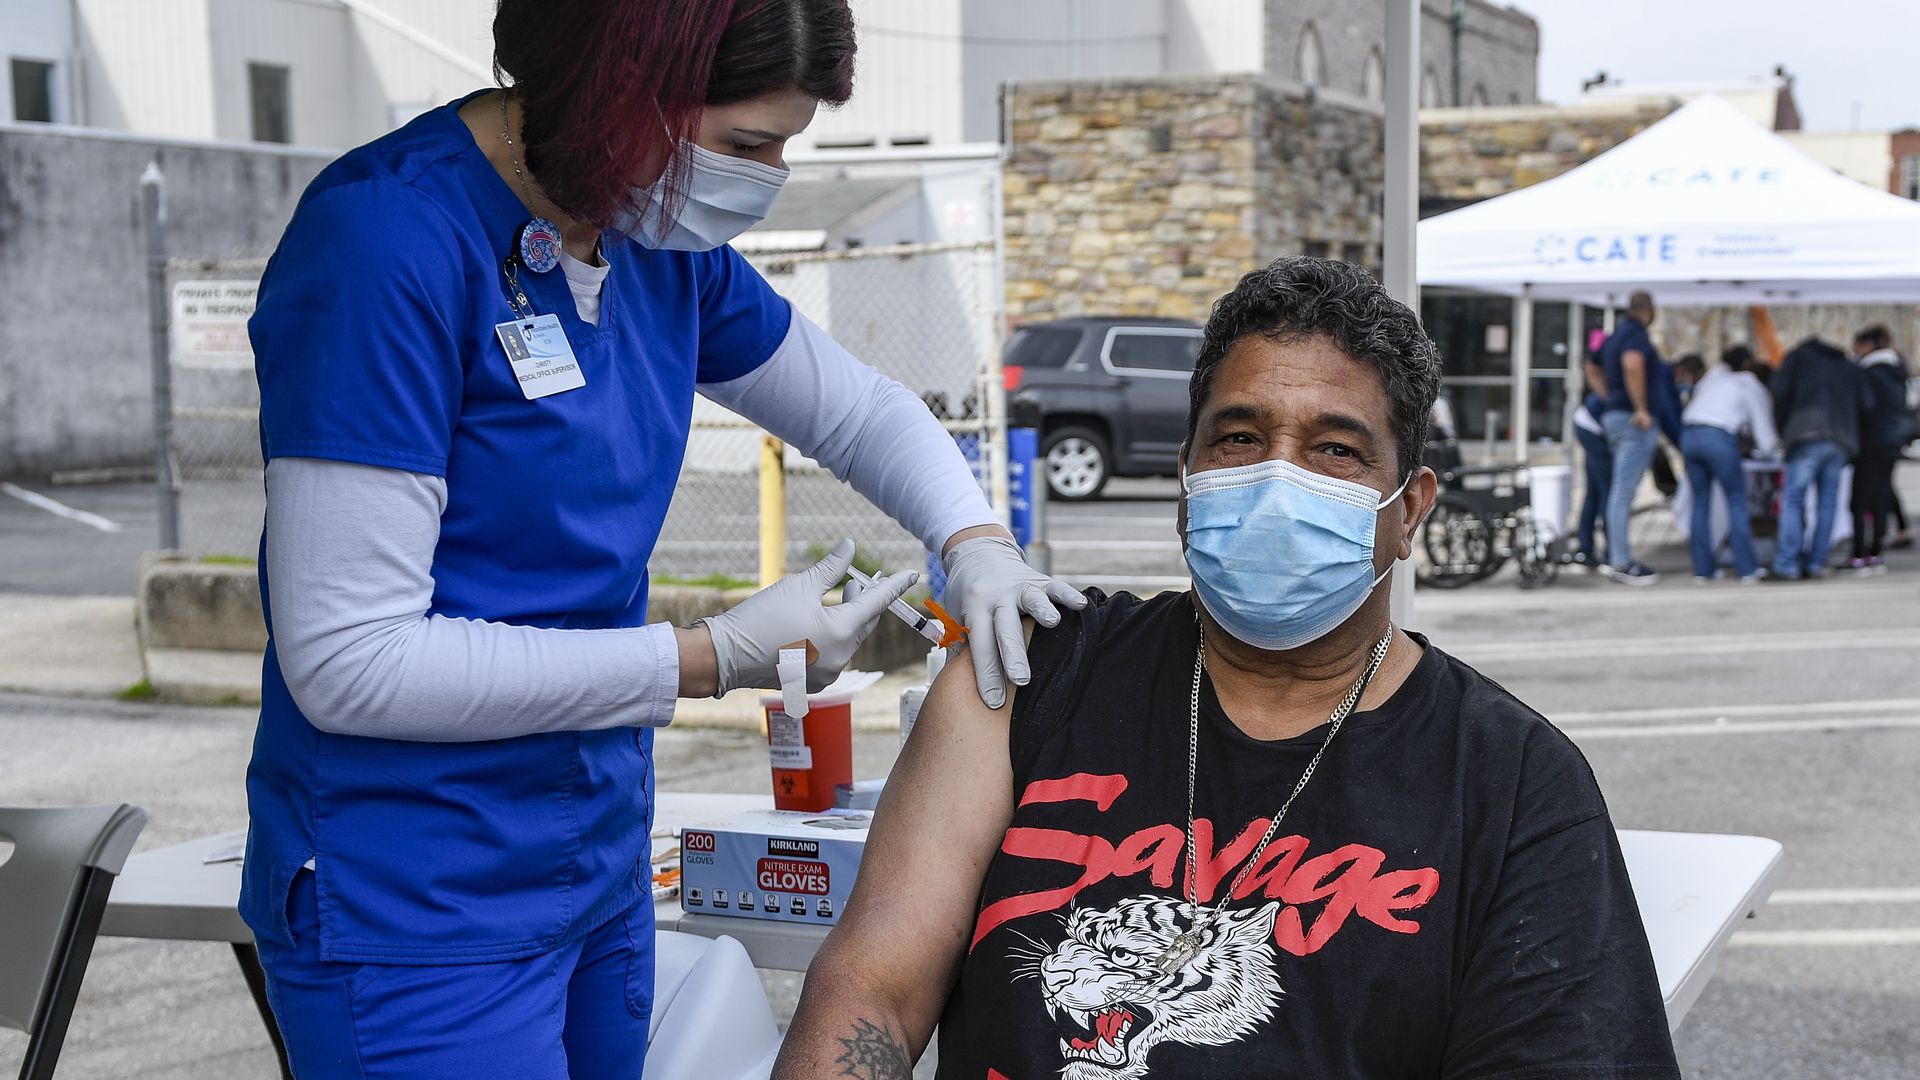 Photo of a masked person getting their vaccine shot in their right arm outside in an open area